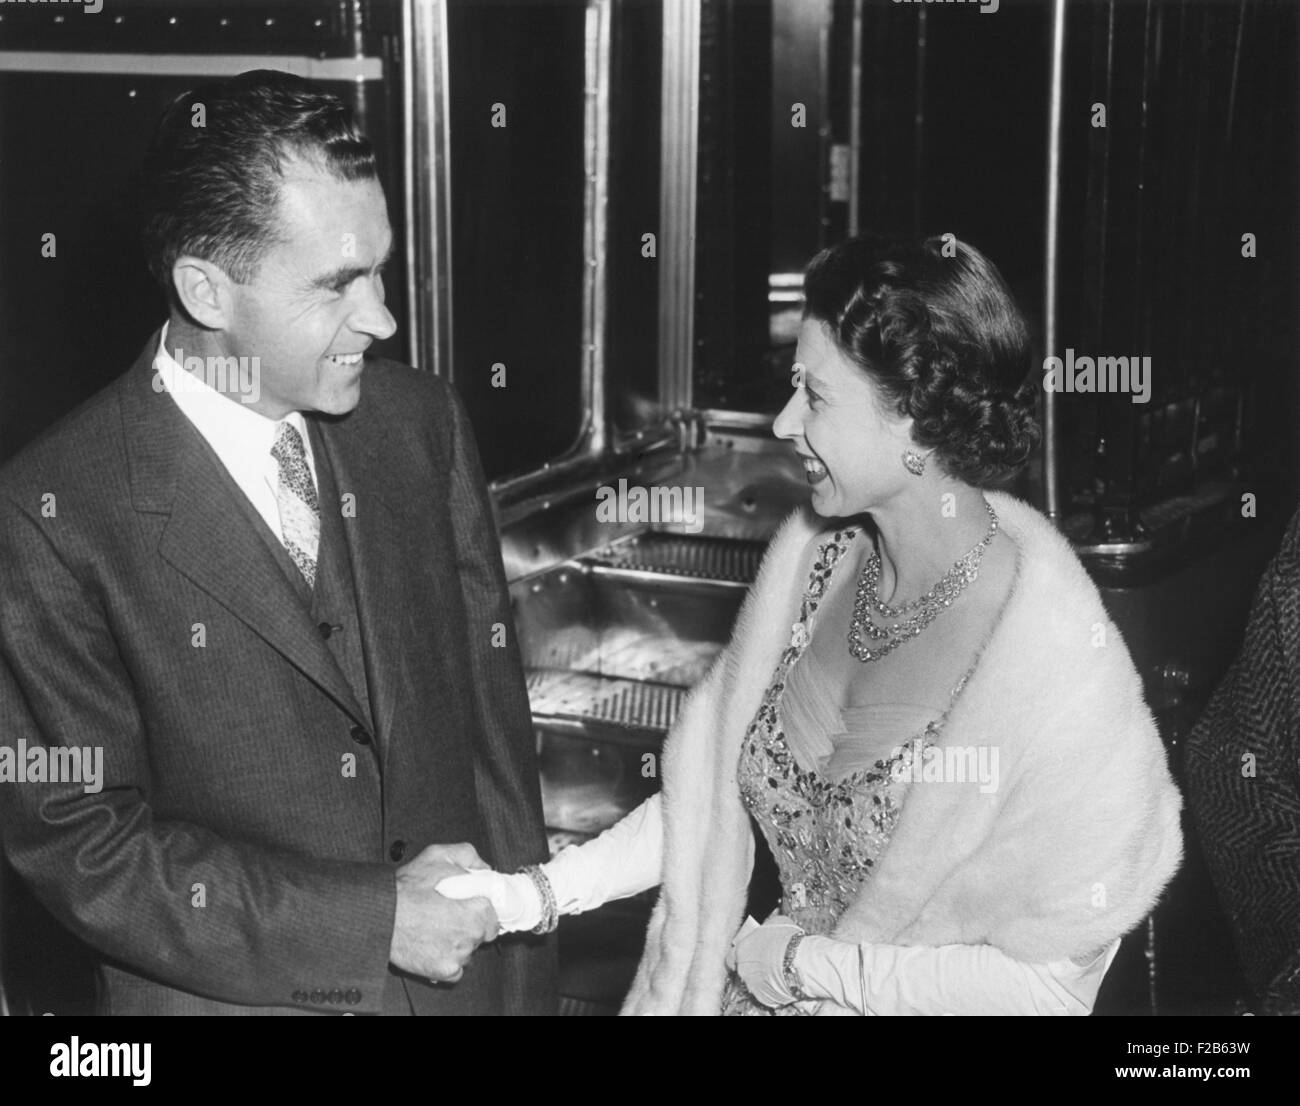 Queen Elizabeth II shaking Vice President Richard Nixon's hand. At the British Embassy in Washington during a dinner the royal couple gave for President and Mrs. Eisenhower. Oct. 19, 1957. - (BSLOC 2014 16 142) Stock Photo